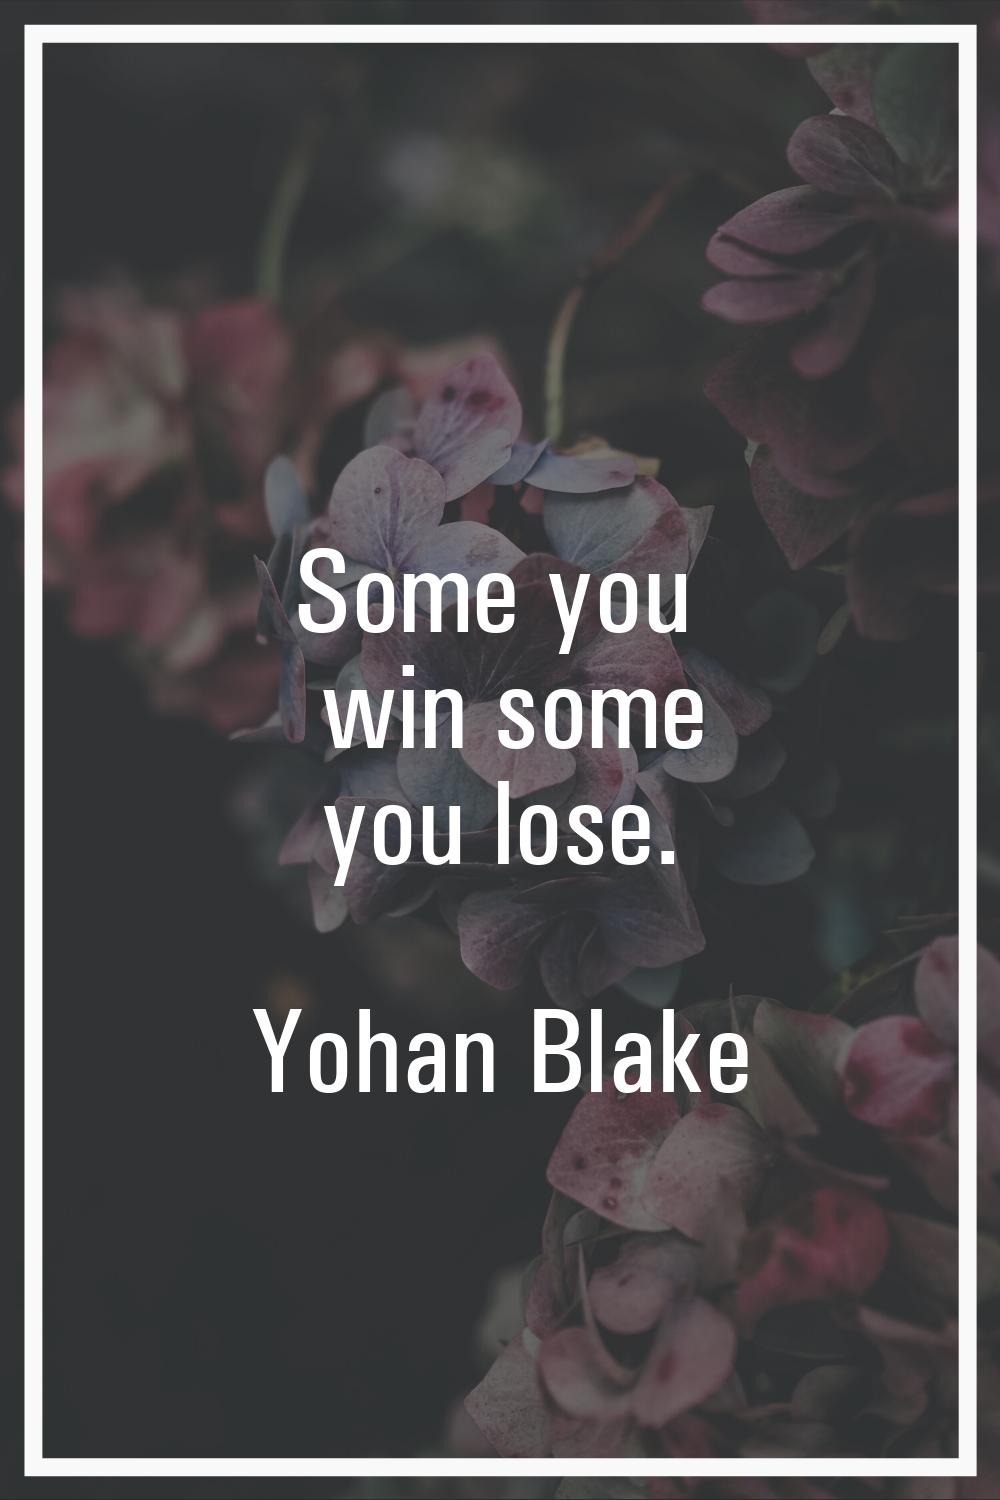 Some you win some you lose.